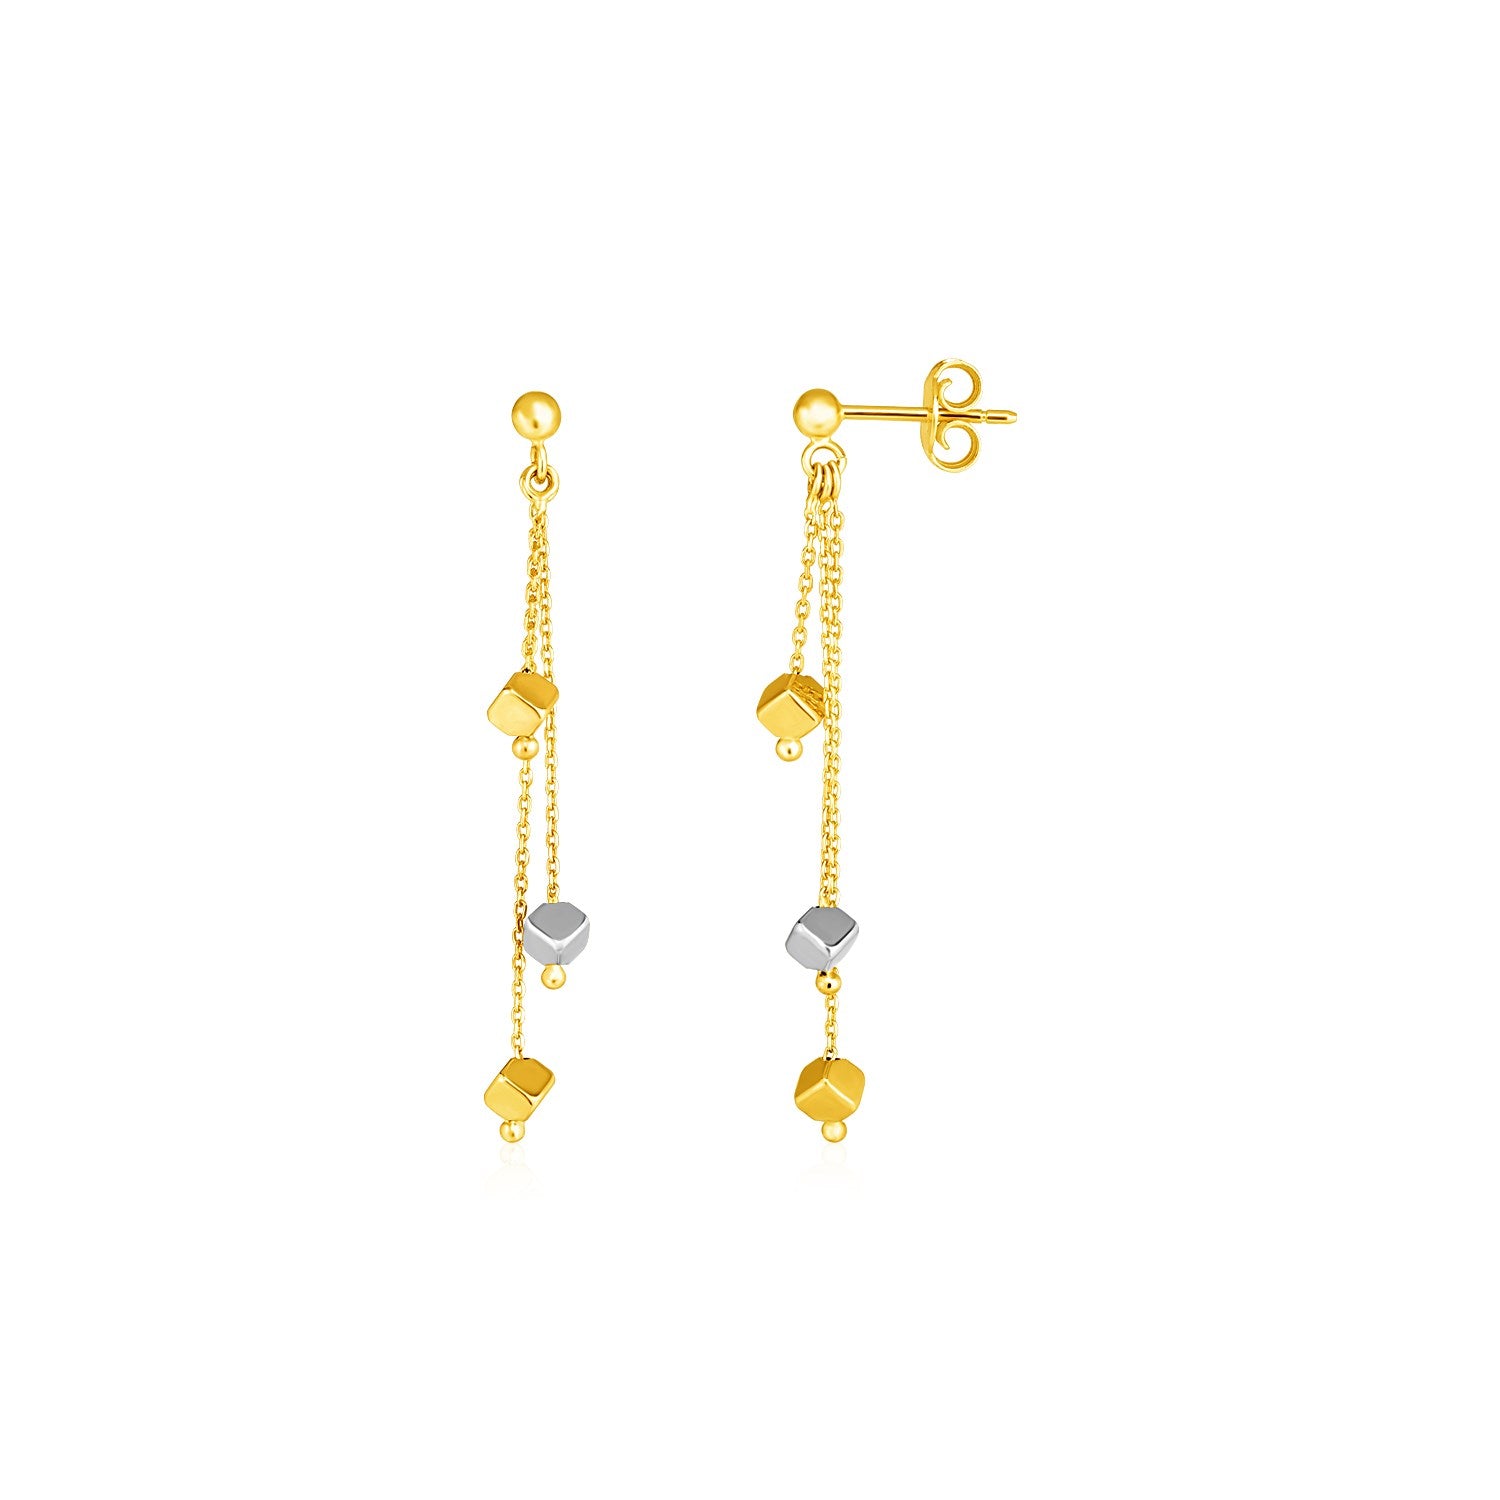 114k Two Tone Gold Post Earrings with Polished Cube Dangles